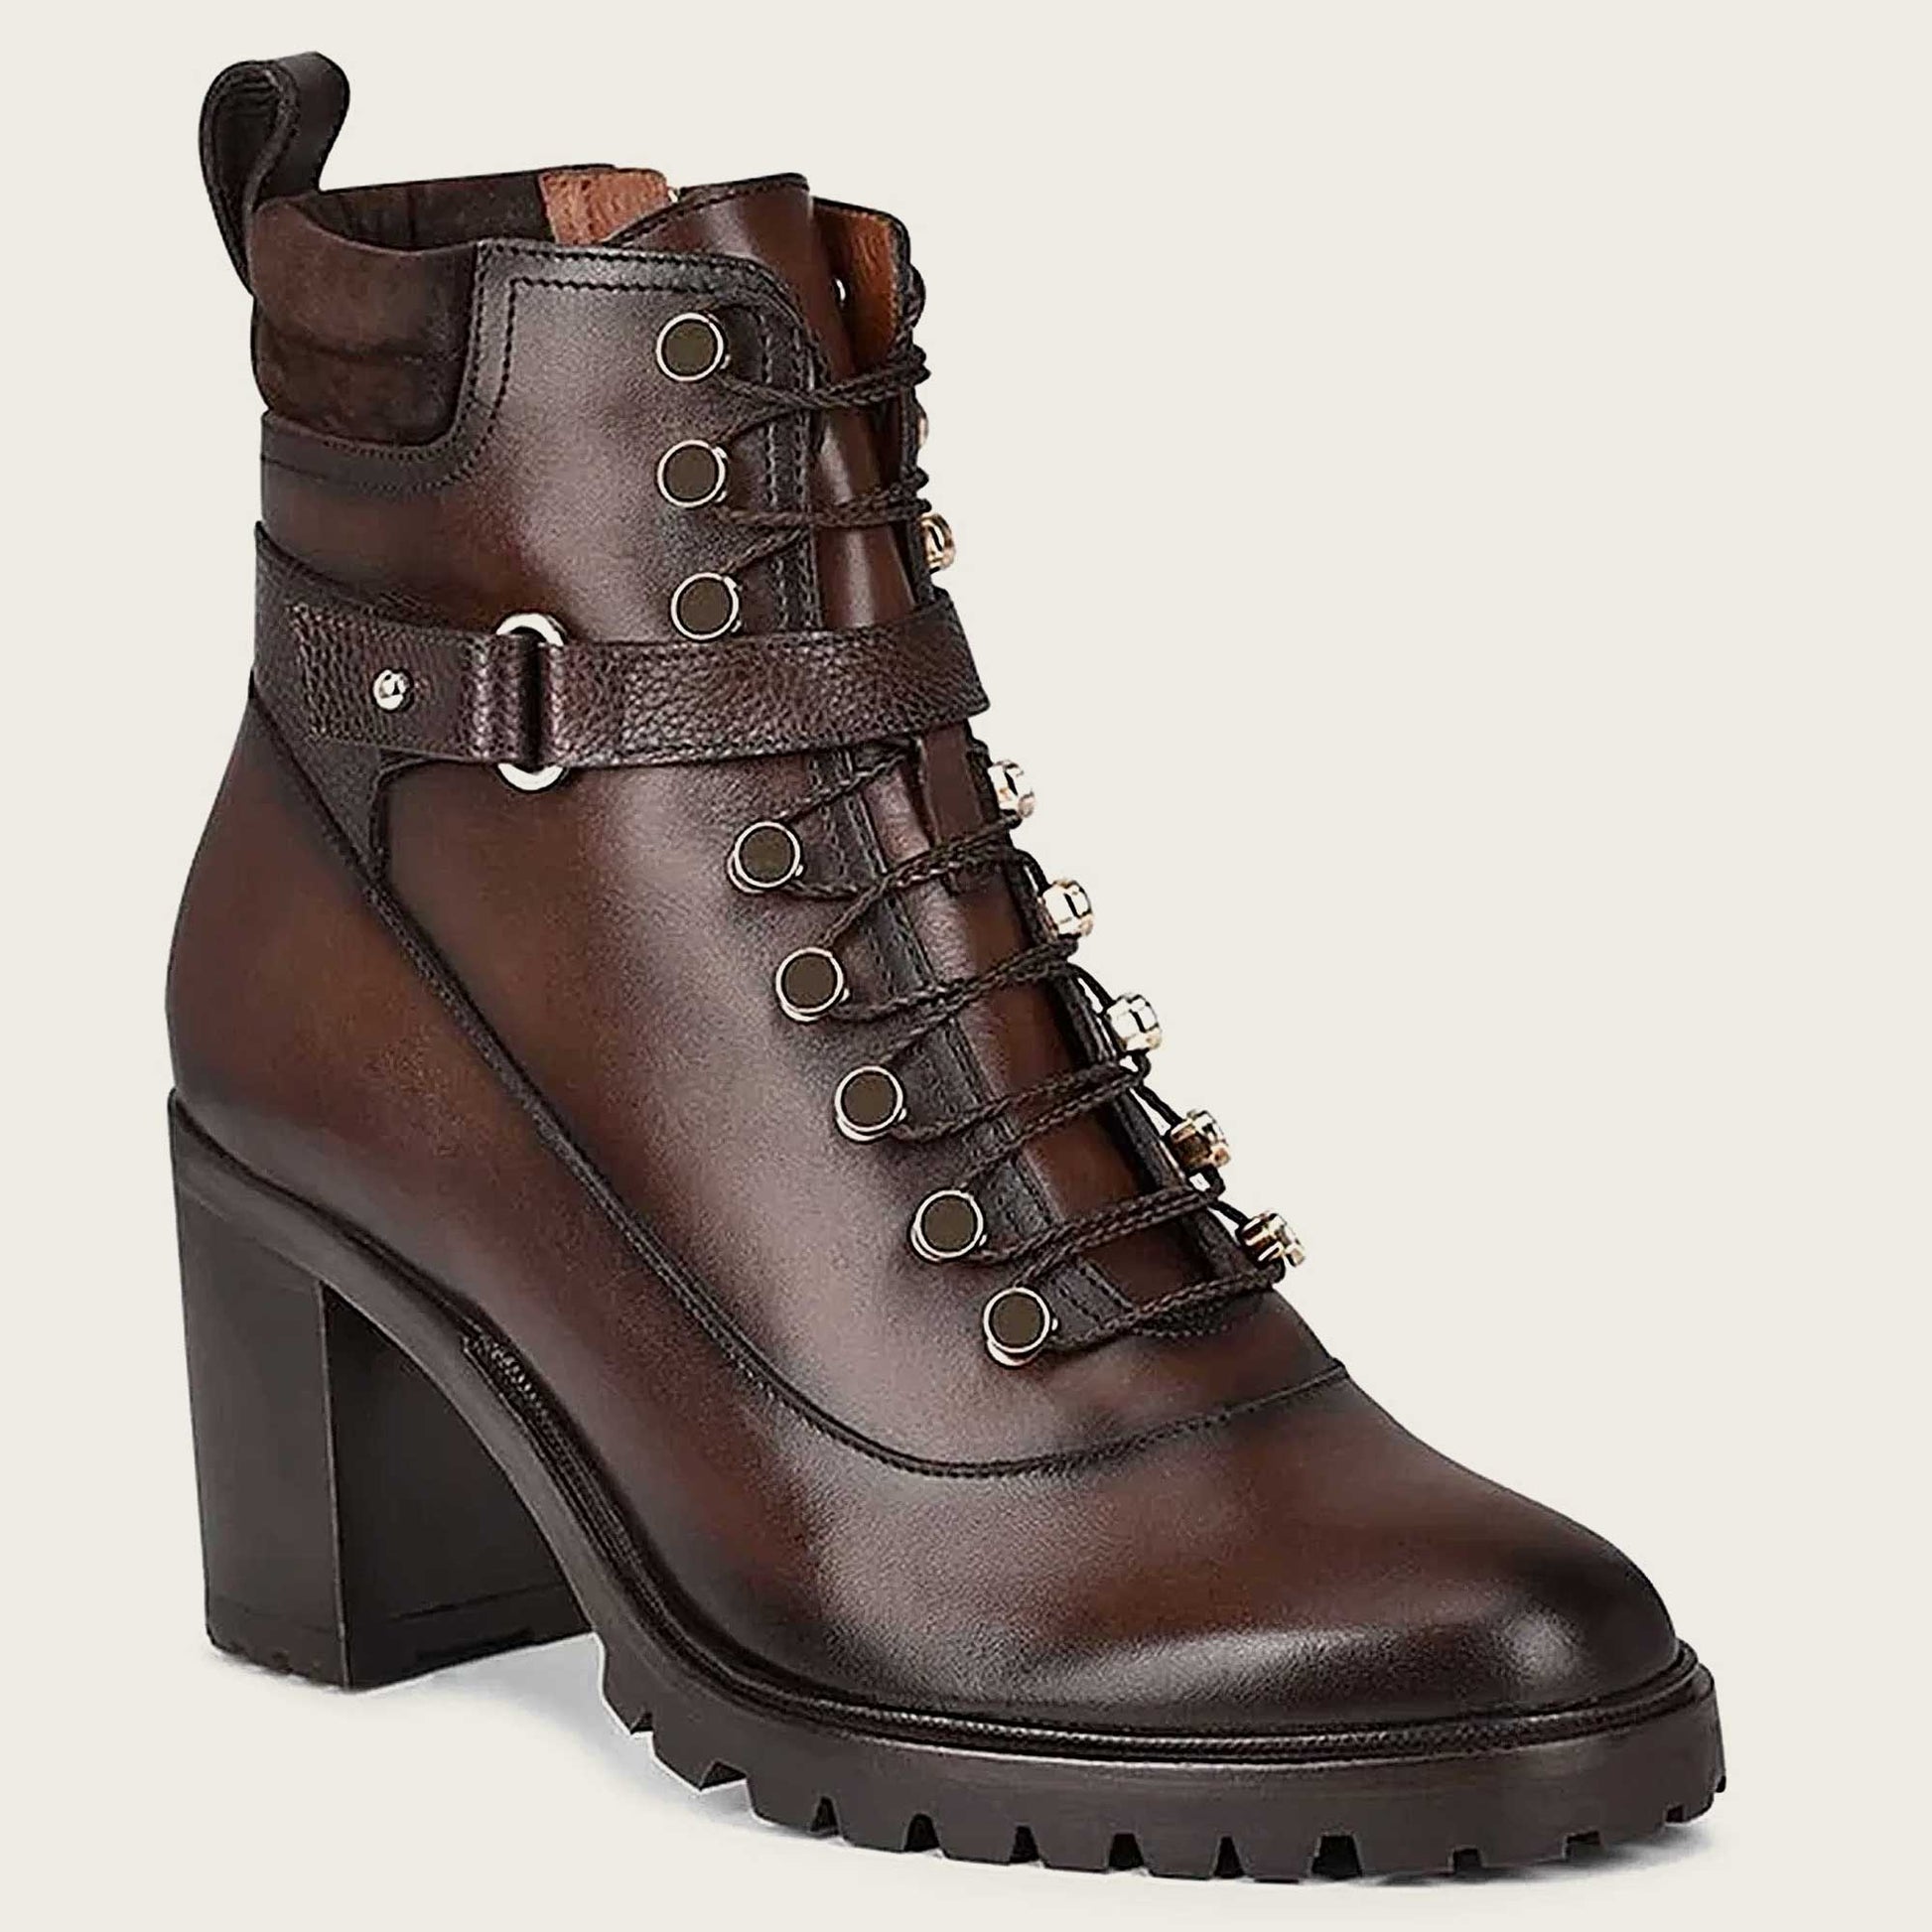 Stylish Inca brown leather bootie with a modern design, perfect for any occasion.